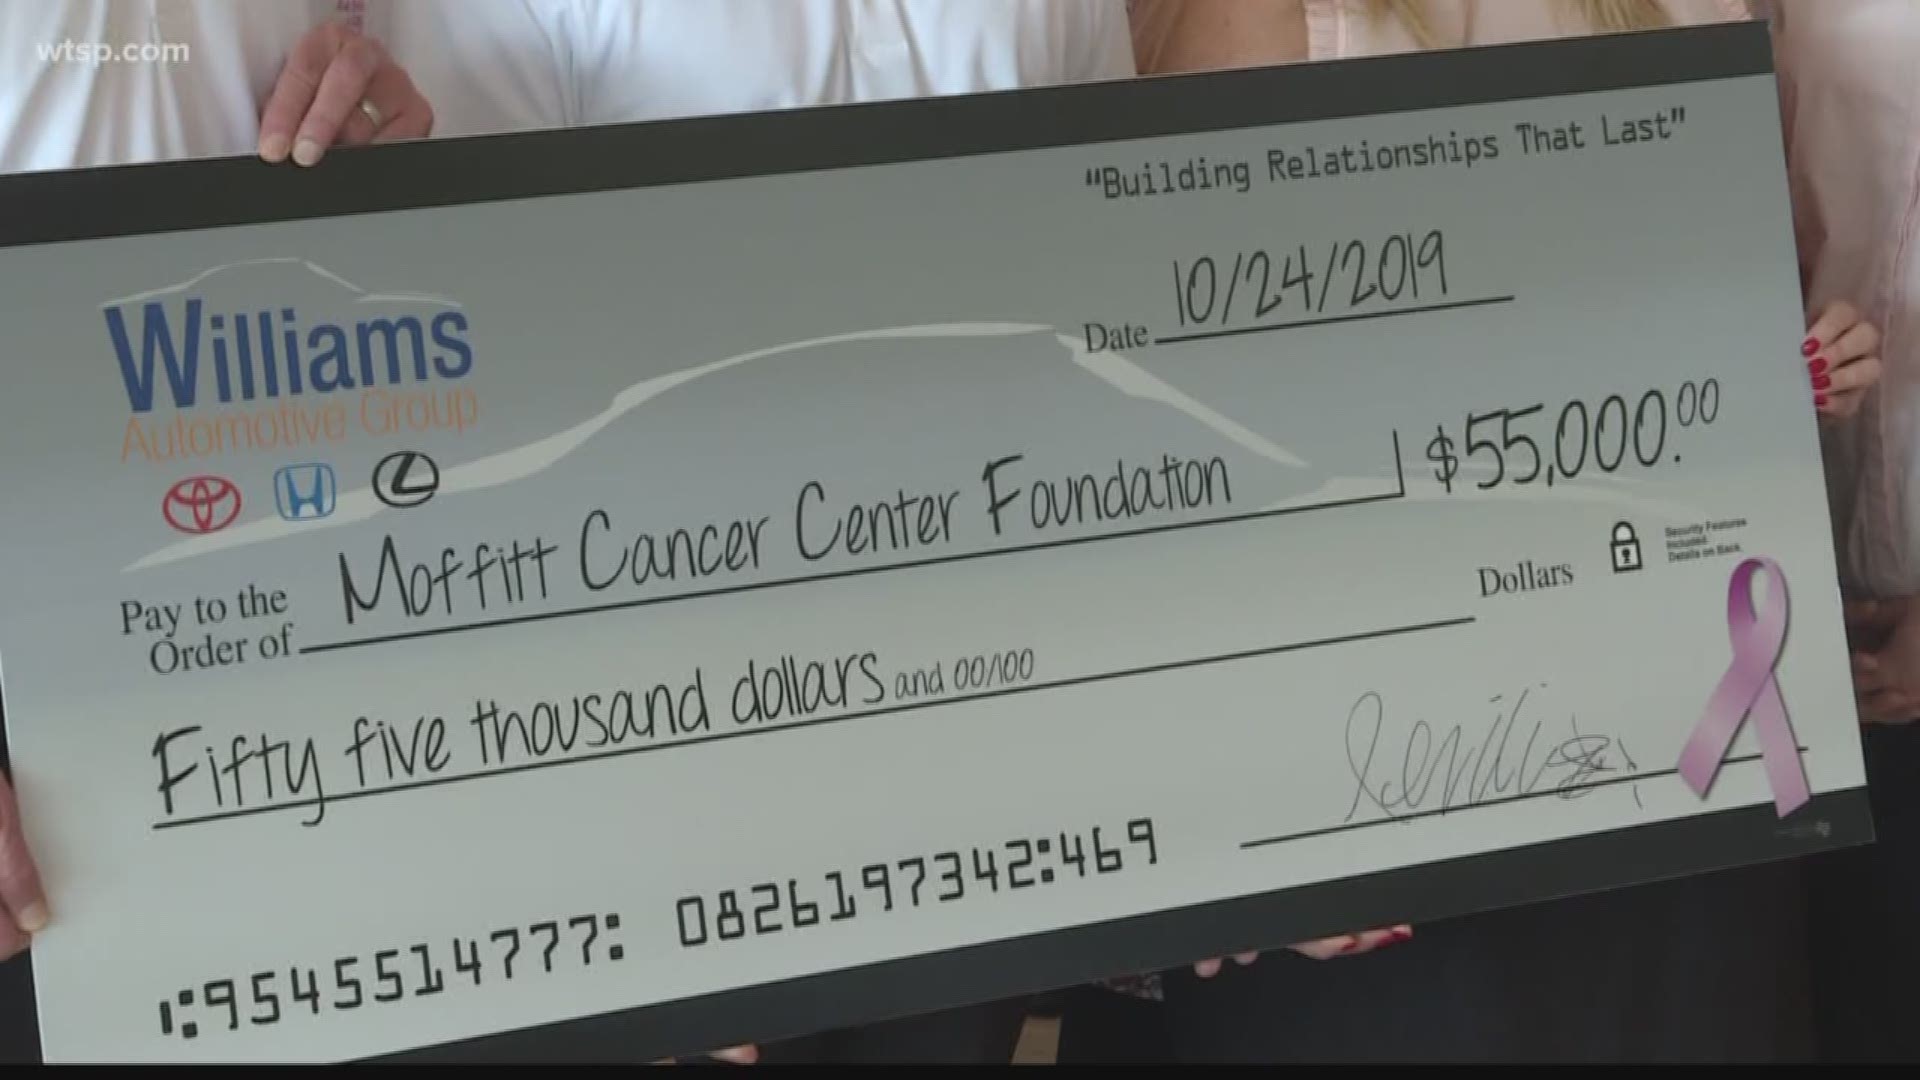 Car sales at Williams Automotive Group help fuel breast cancer research. https://bit.ly/2PkQ719